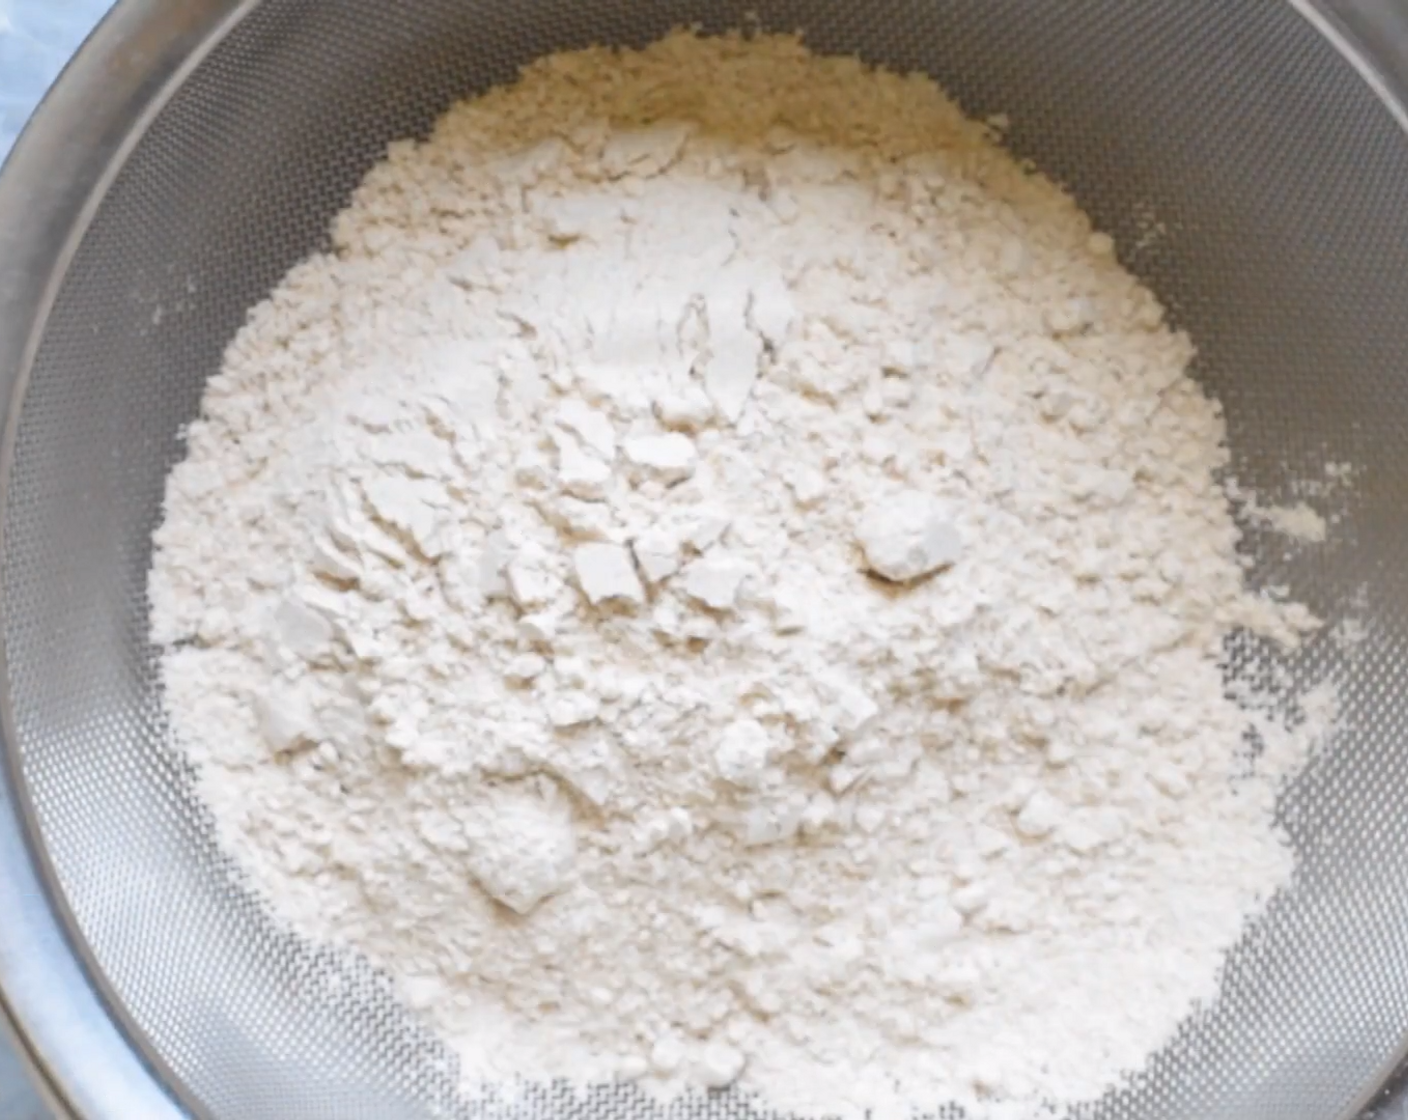 step 1 In a vessel add sieved Whole Wheat Flour (1 cup), Rice Flour (1/2 cup) along with Semolina (2 Tbsp). Mix using a whisk.